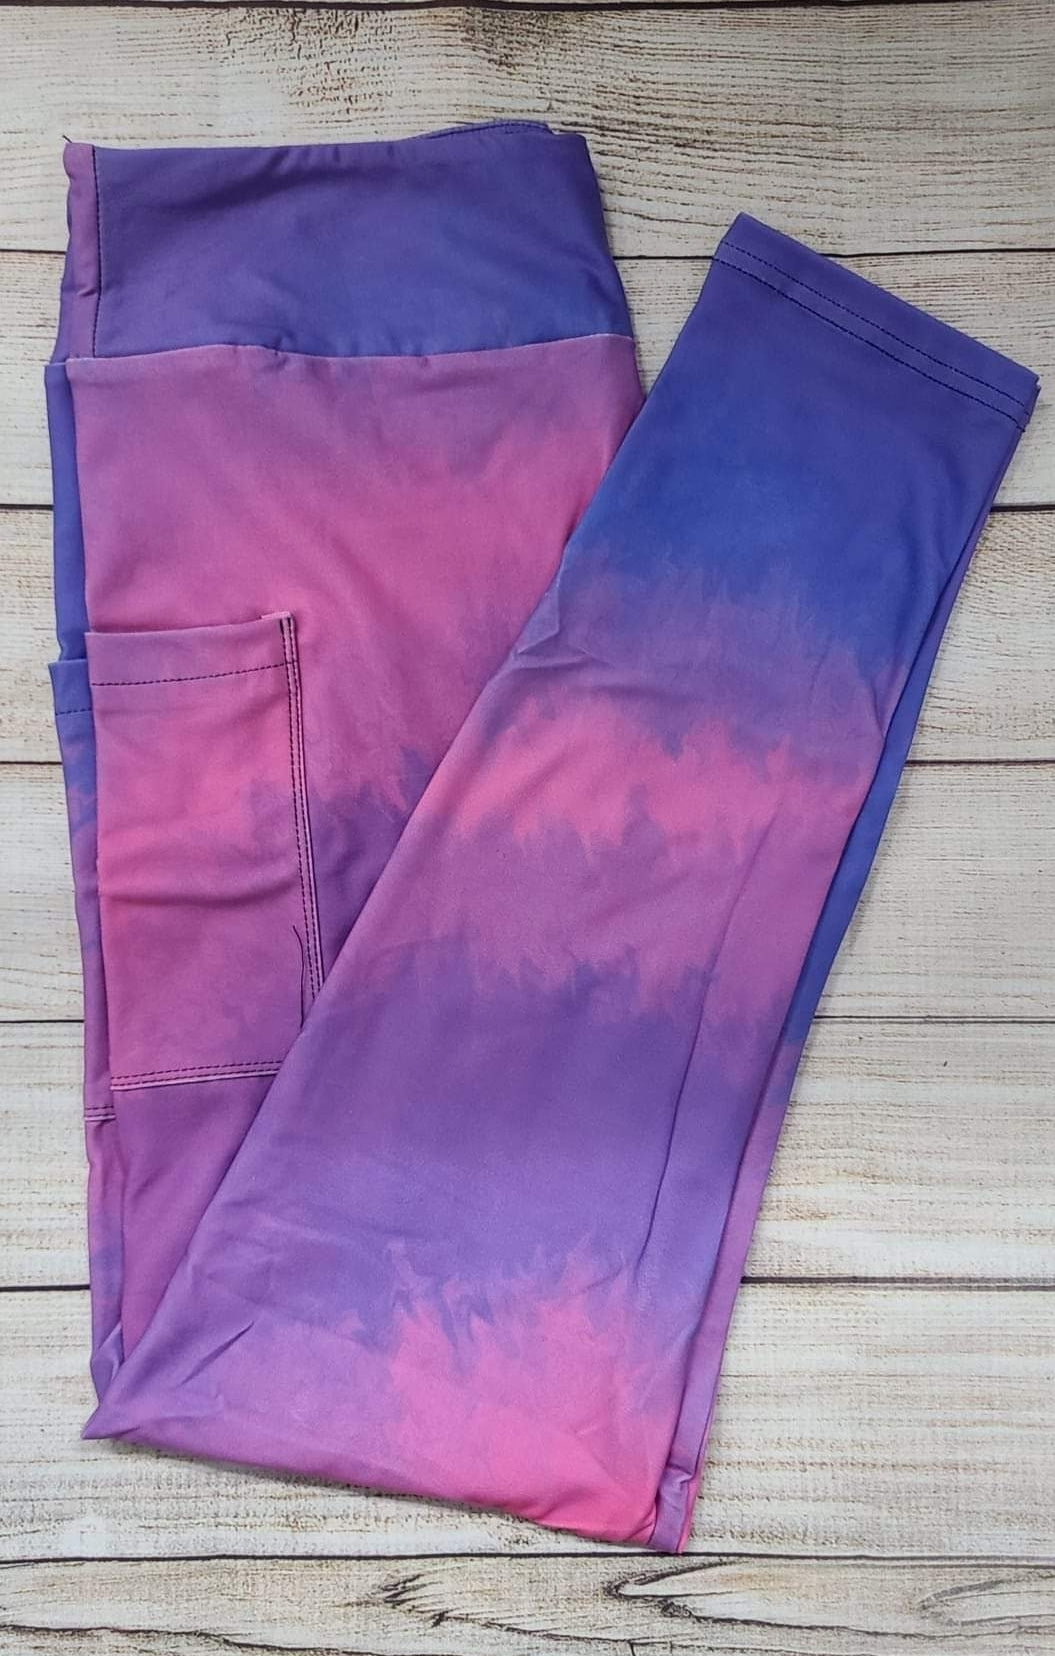 “Pink Feels” Leggings and Capris with pockets